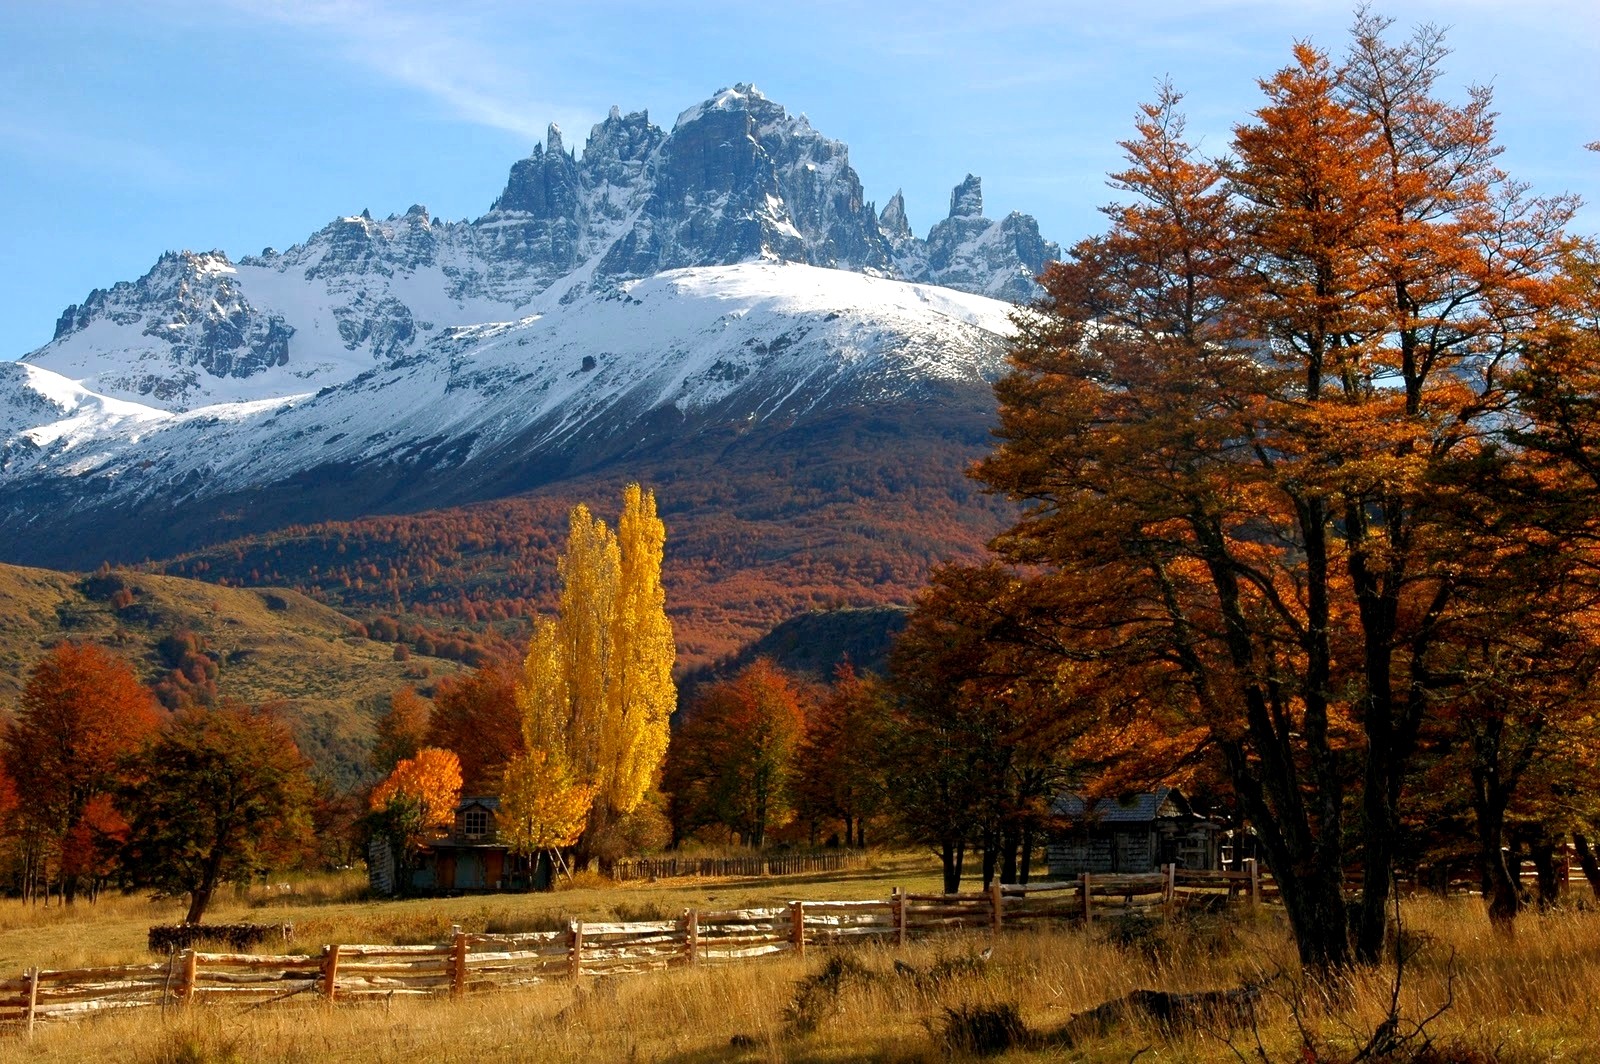 Wallpaper, trees, landscape, forest, fall, mountains, nature, reflection, grass, winter, yellow, snowy peak, orange, valley, fence, wilderness, Chile, Patagonia, cottage, plateau, tree, autumn, leaf, season, mountainous landforms, geographical feature